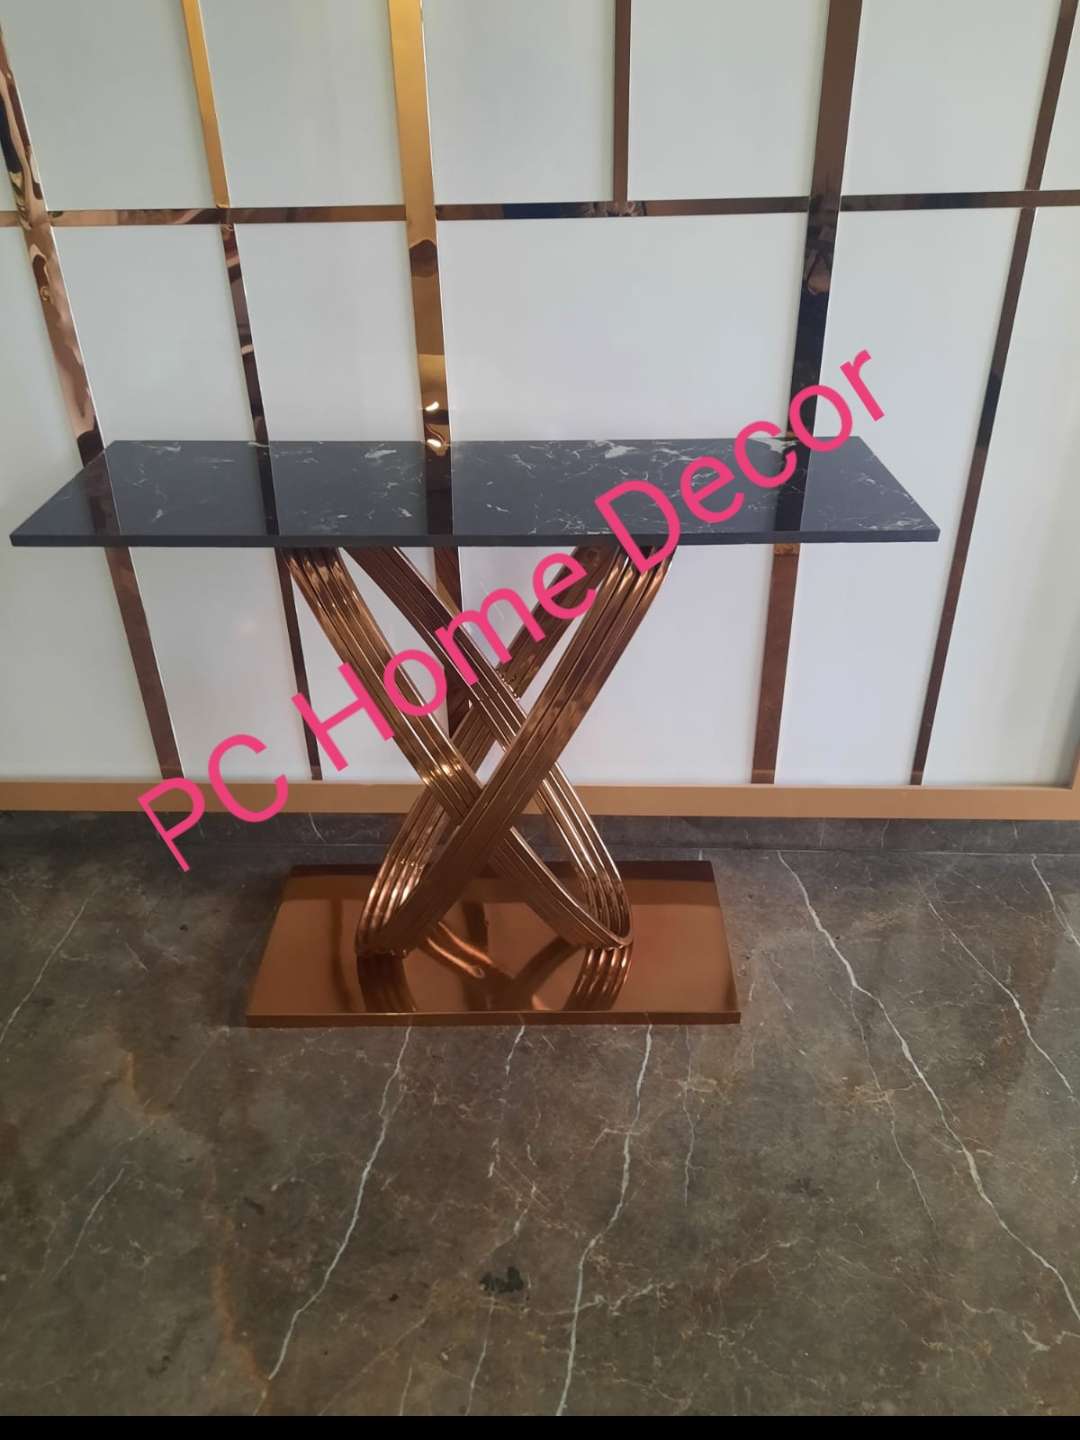 Stainless Steel X Shape Console Table